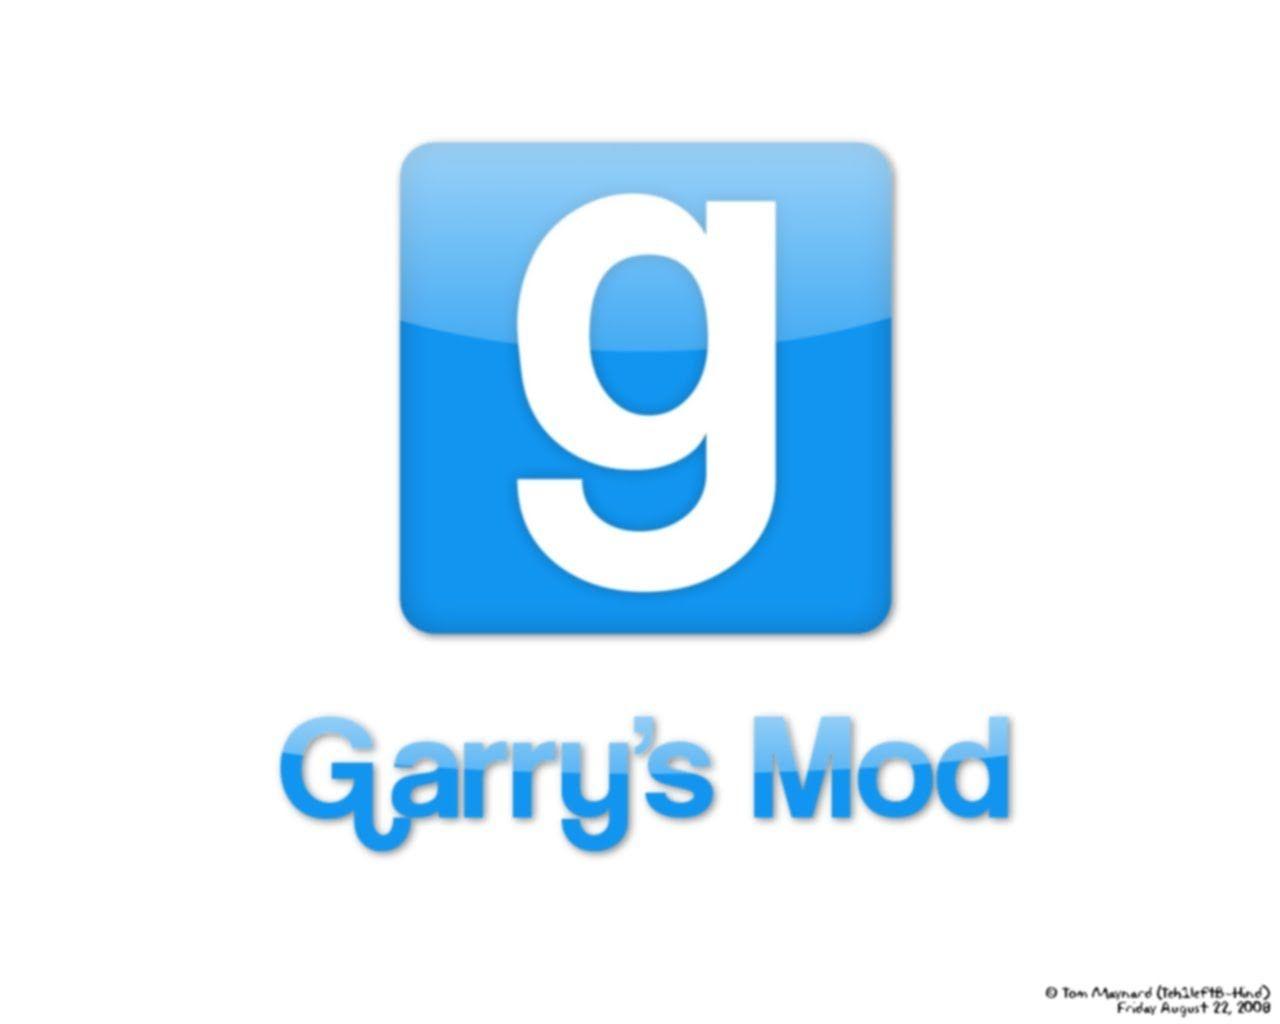 Garrys Mod To Get Rid of LAG and Increase FPS!